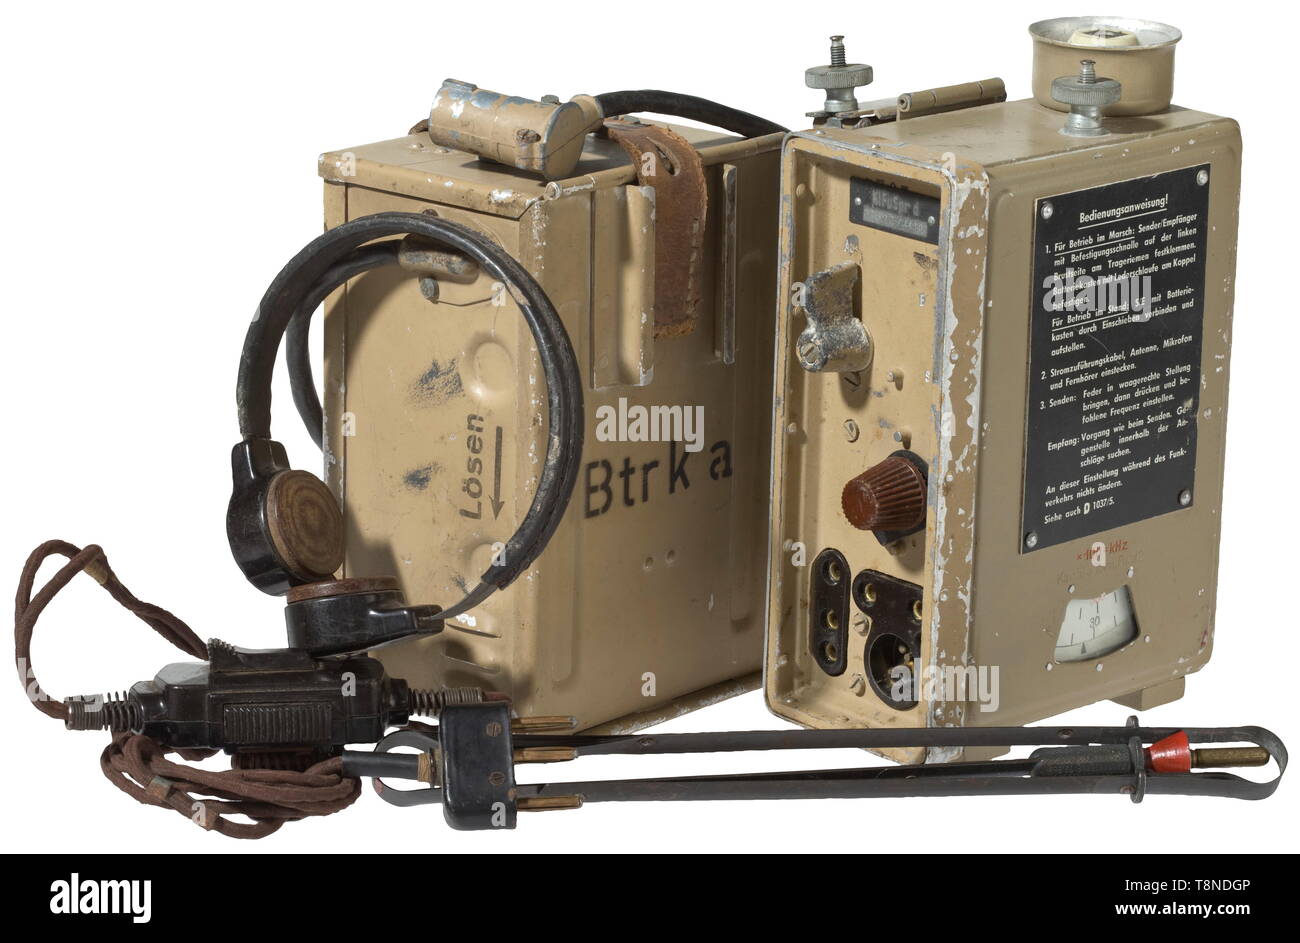 Ideelt entreprenør jernbane A portable field radio "d" - Dorette with accessories Aluminium case with  typical original beige finish. The radio with attached instructions,  frequency scale and switches. Wehrmacht acceptance stamp and type plaque  "KlFuSpr